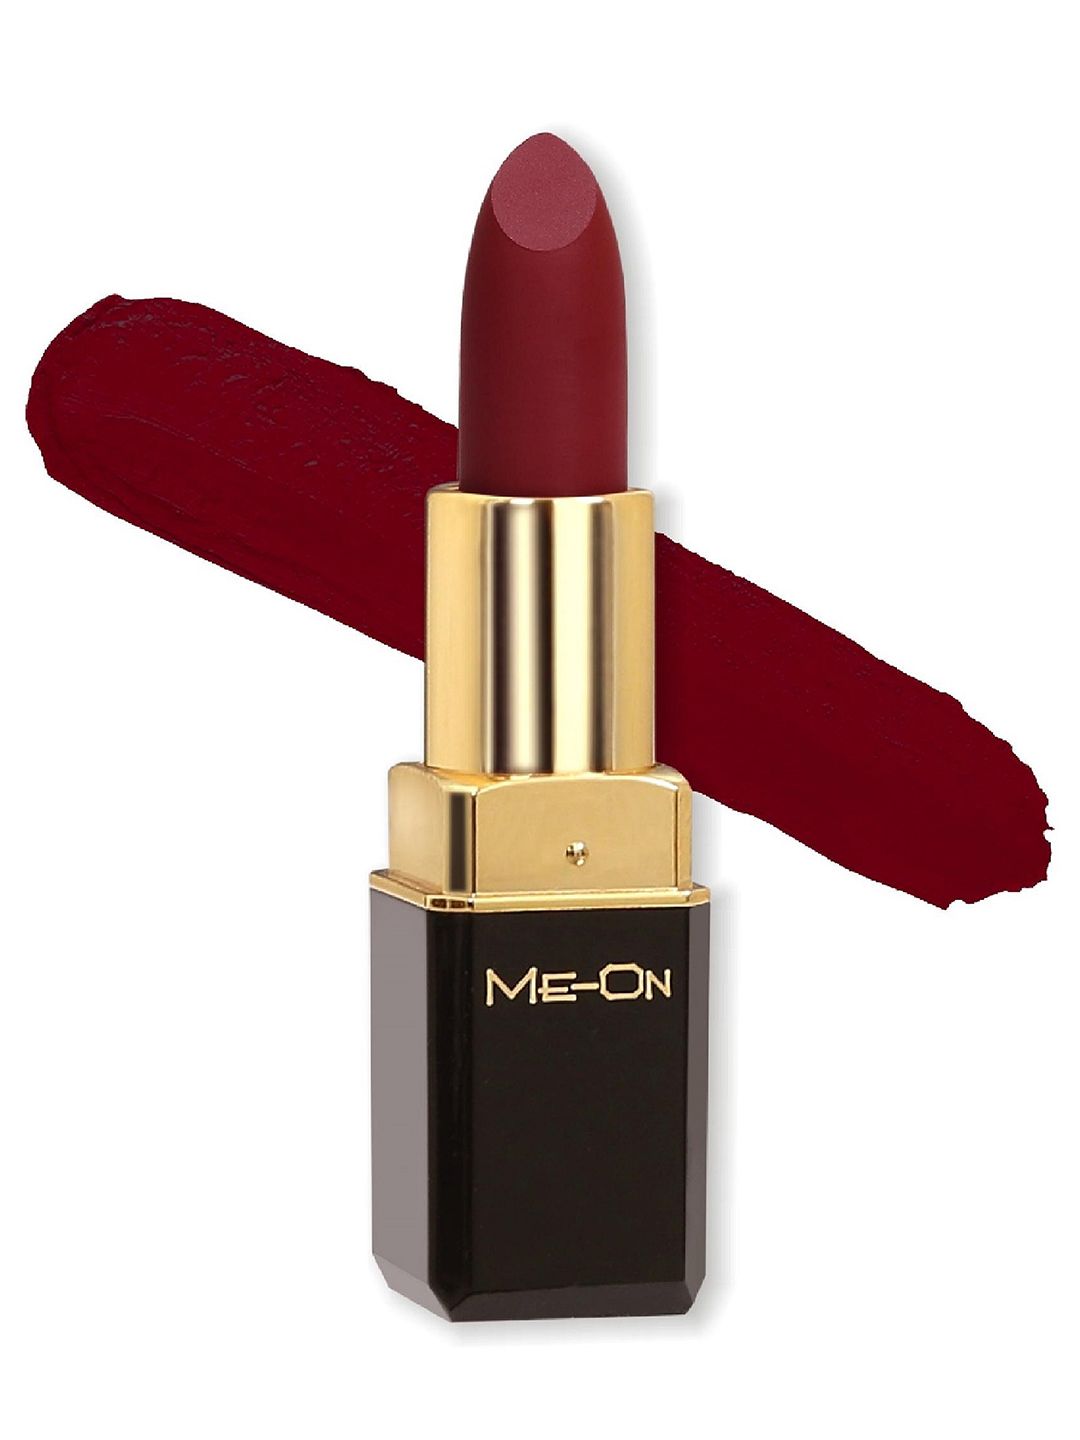 ME-ON Color Addict HD Matte Lipstick - Rusty Red 06 Price in India